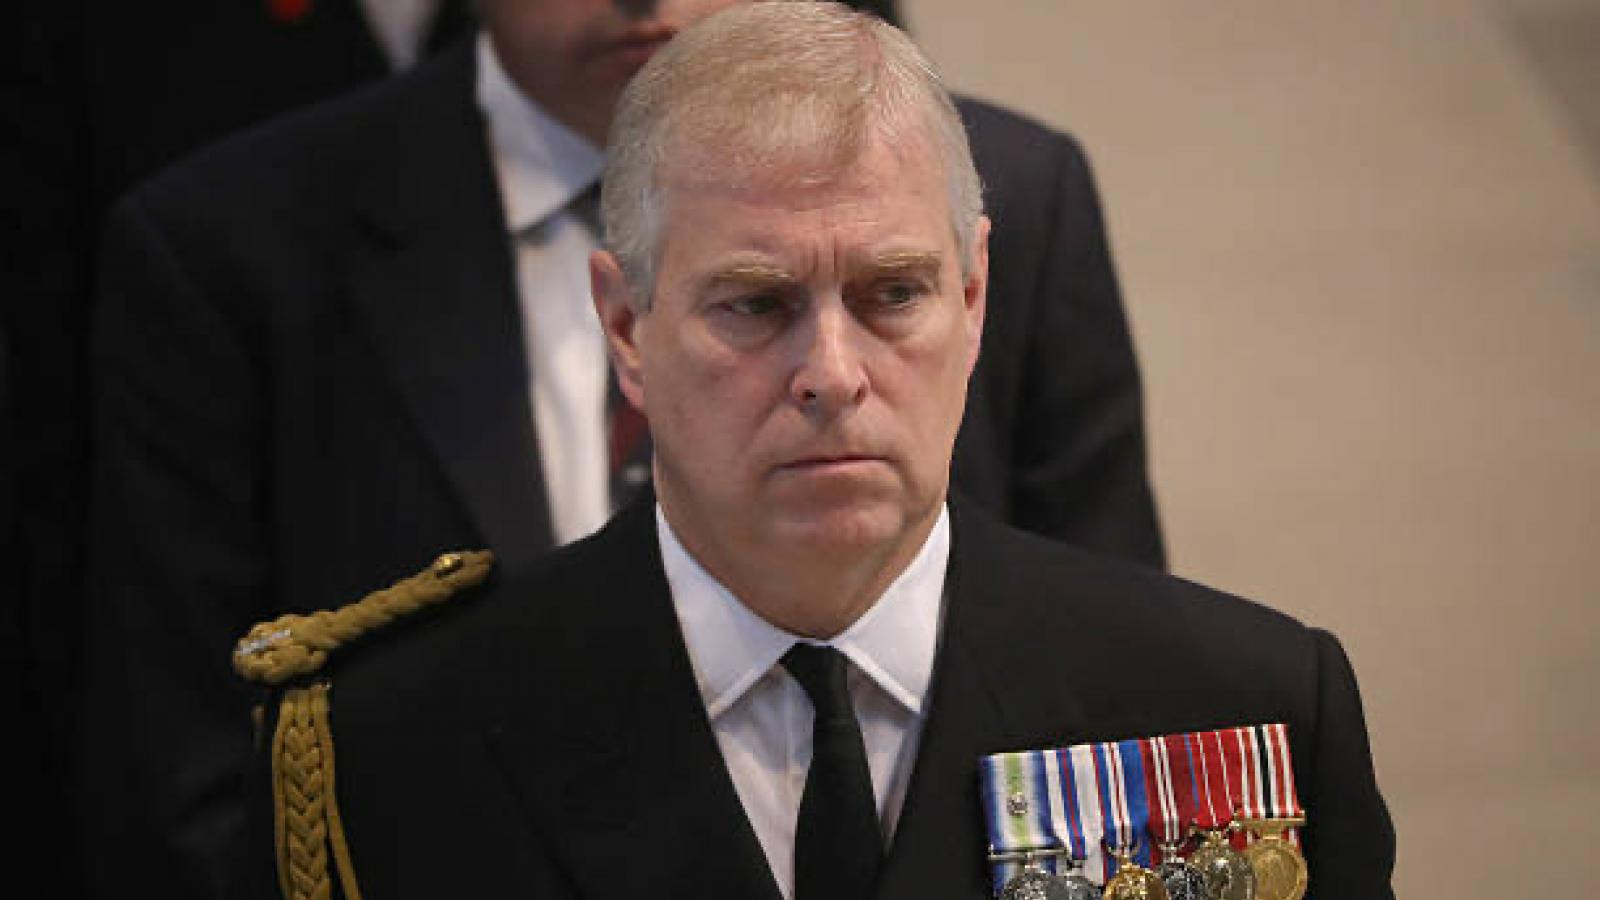 Scotland yard closes sex abuse probe against Prince Andrew without charges Andrew still faces a lawsuit filed by Virginia Giuffre 41E43035-228E-4A92-BE0C-913CA6510E0C